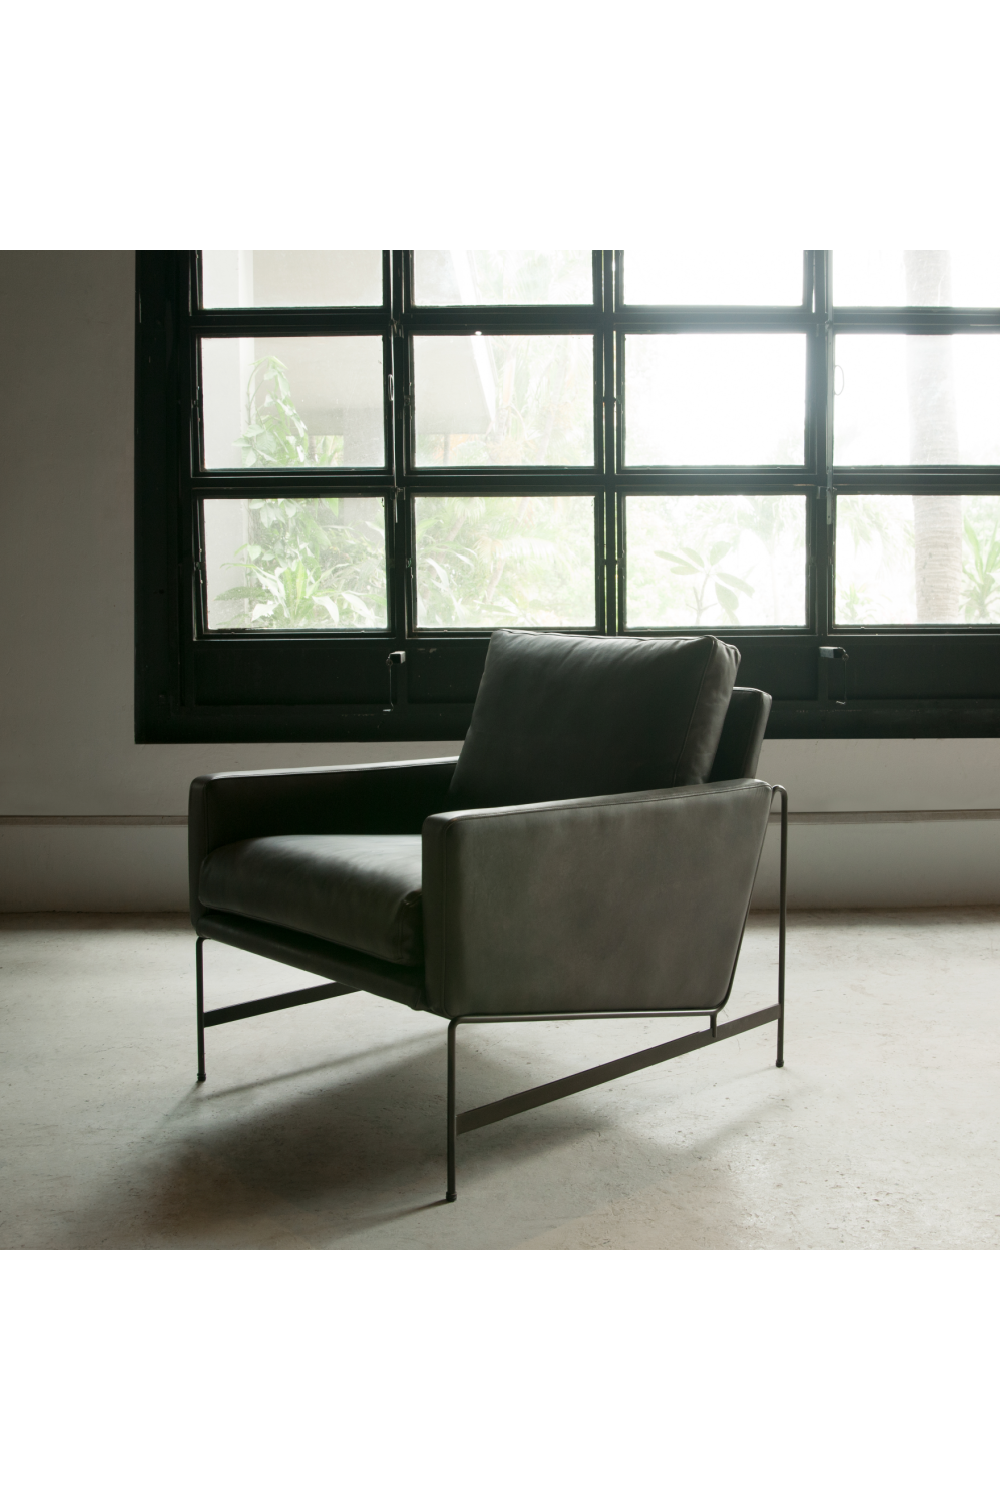 Destroyed Black Leather Upholstery Chair | Andrew Martin Vanessa  | OROA